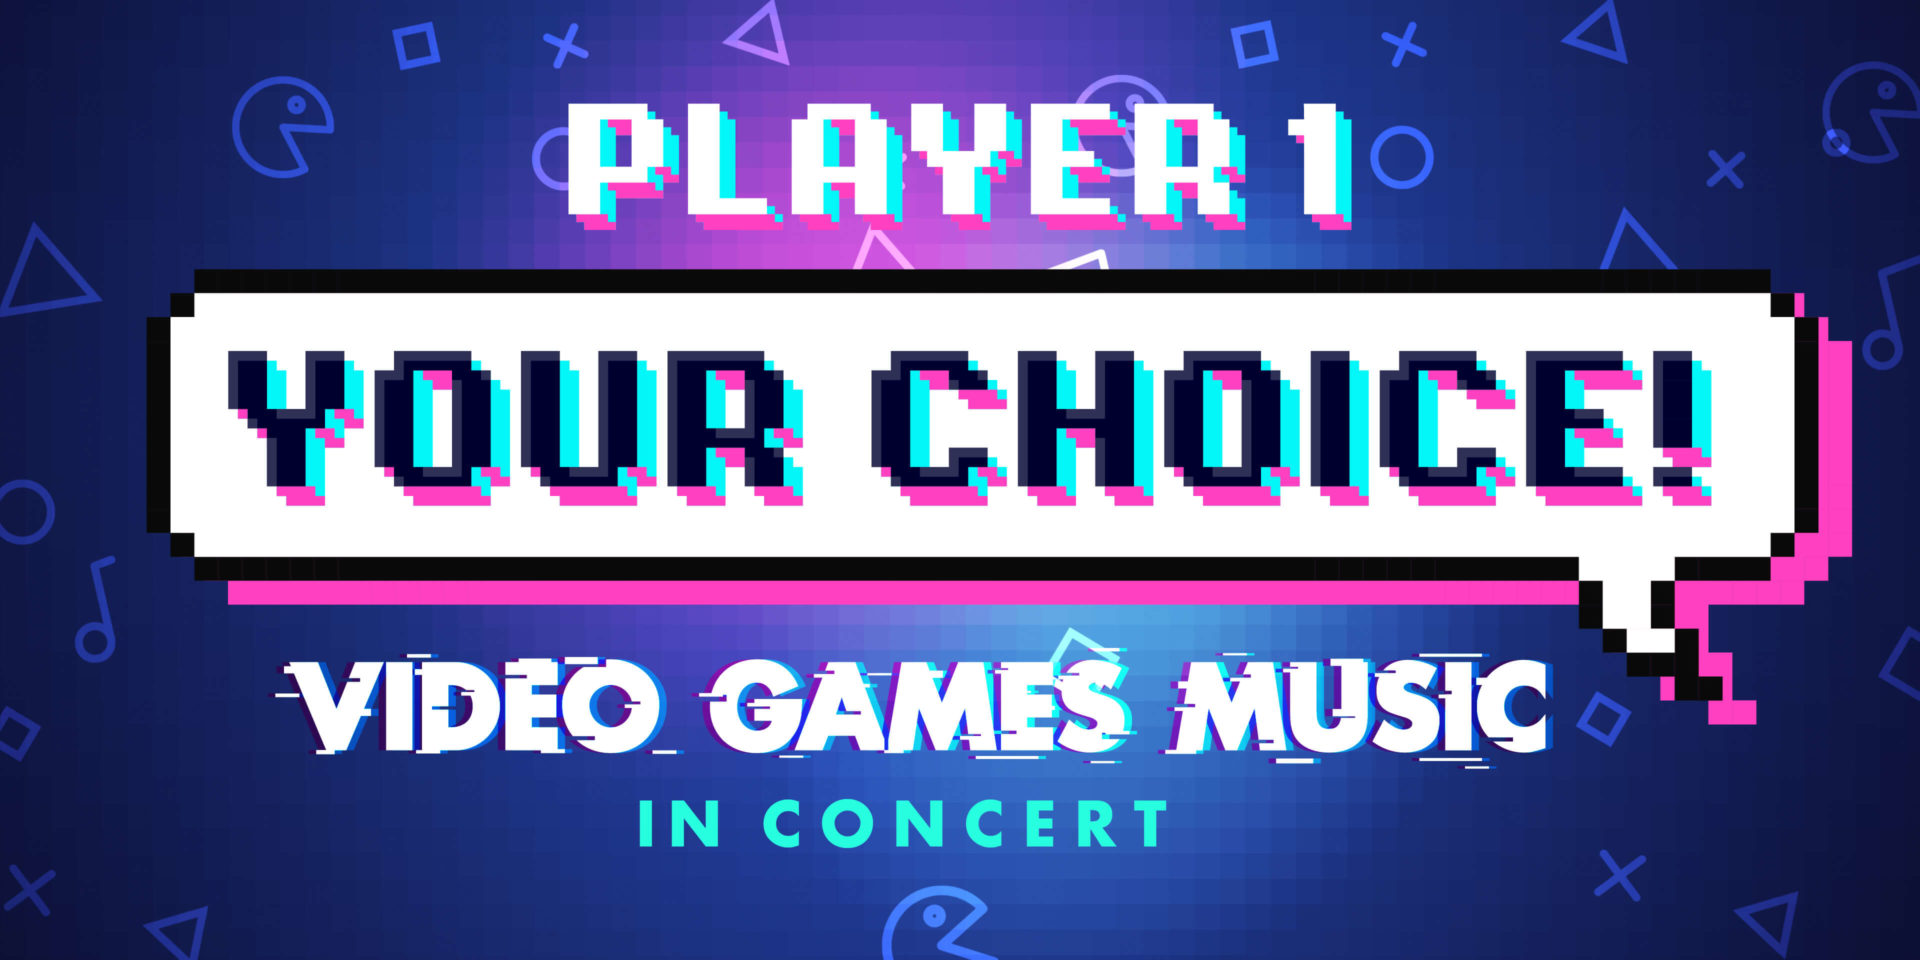 Calling all gamers – the Royal Scottish National Orchestra wants to hear from you!